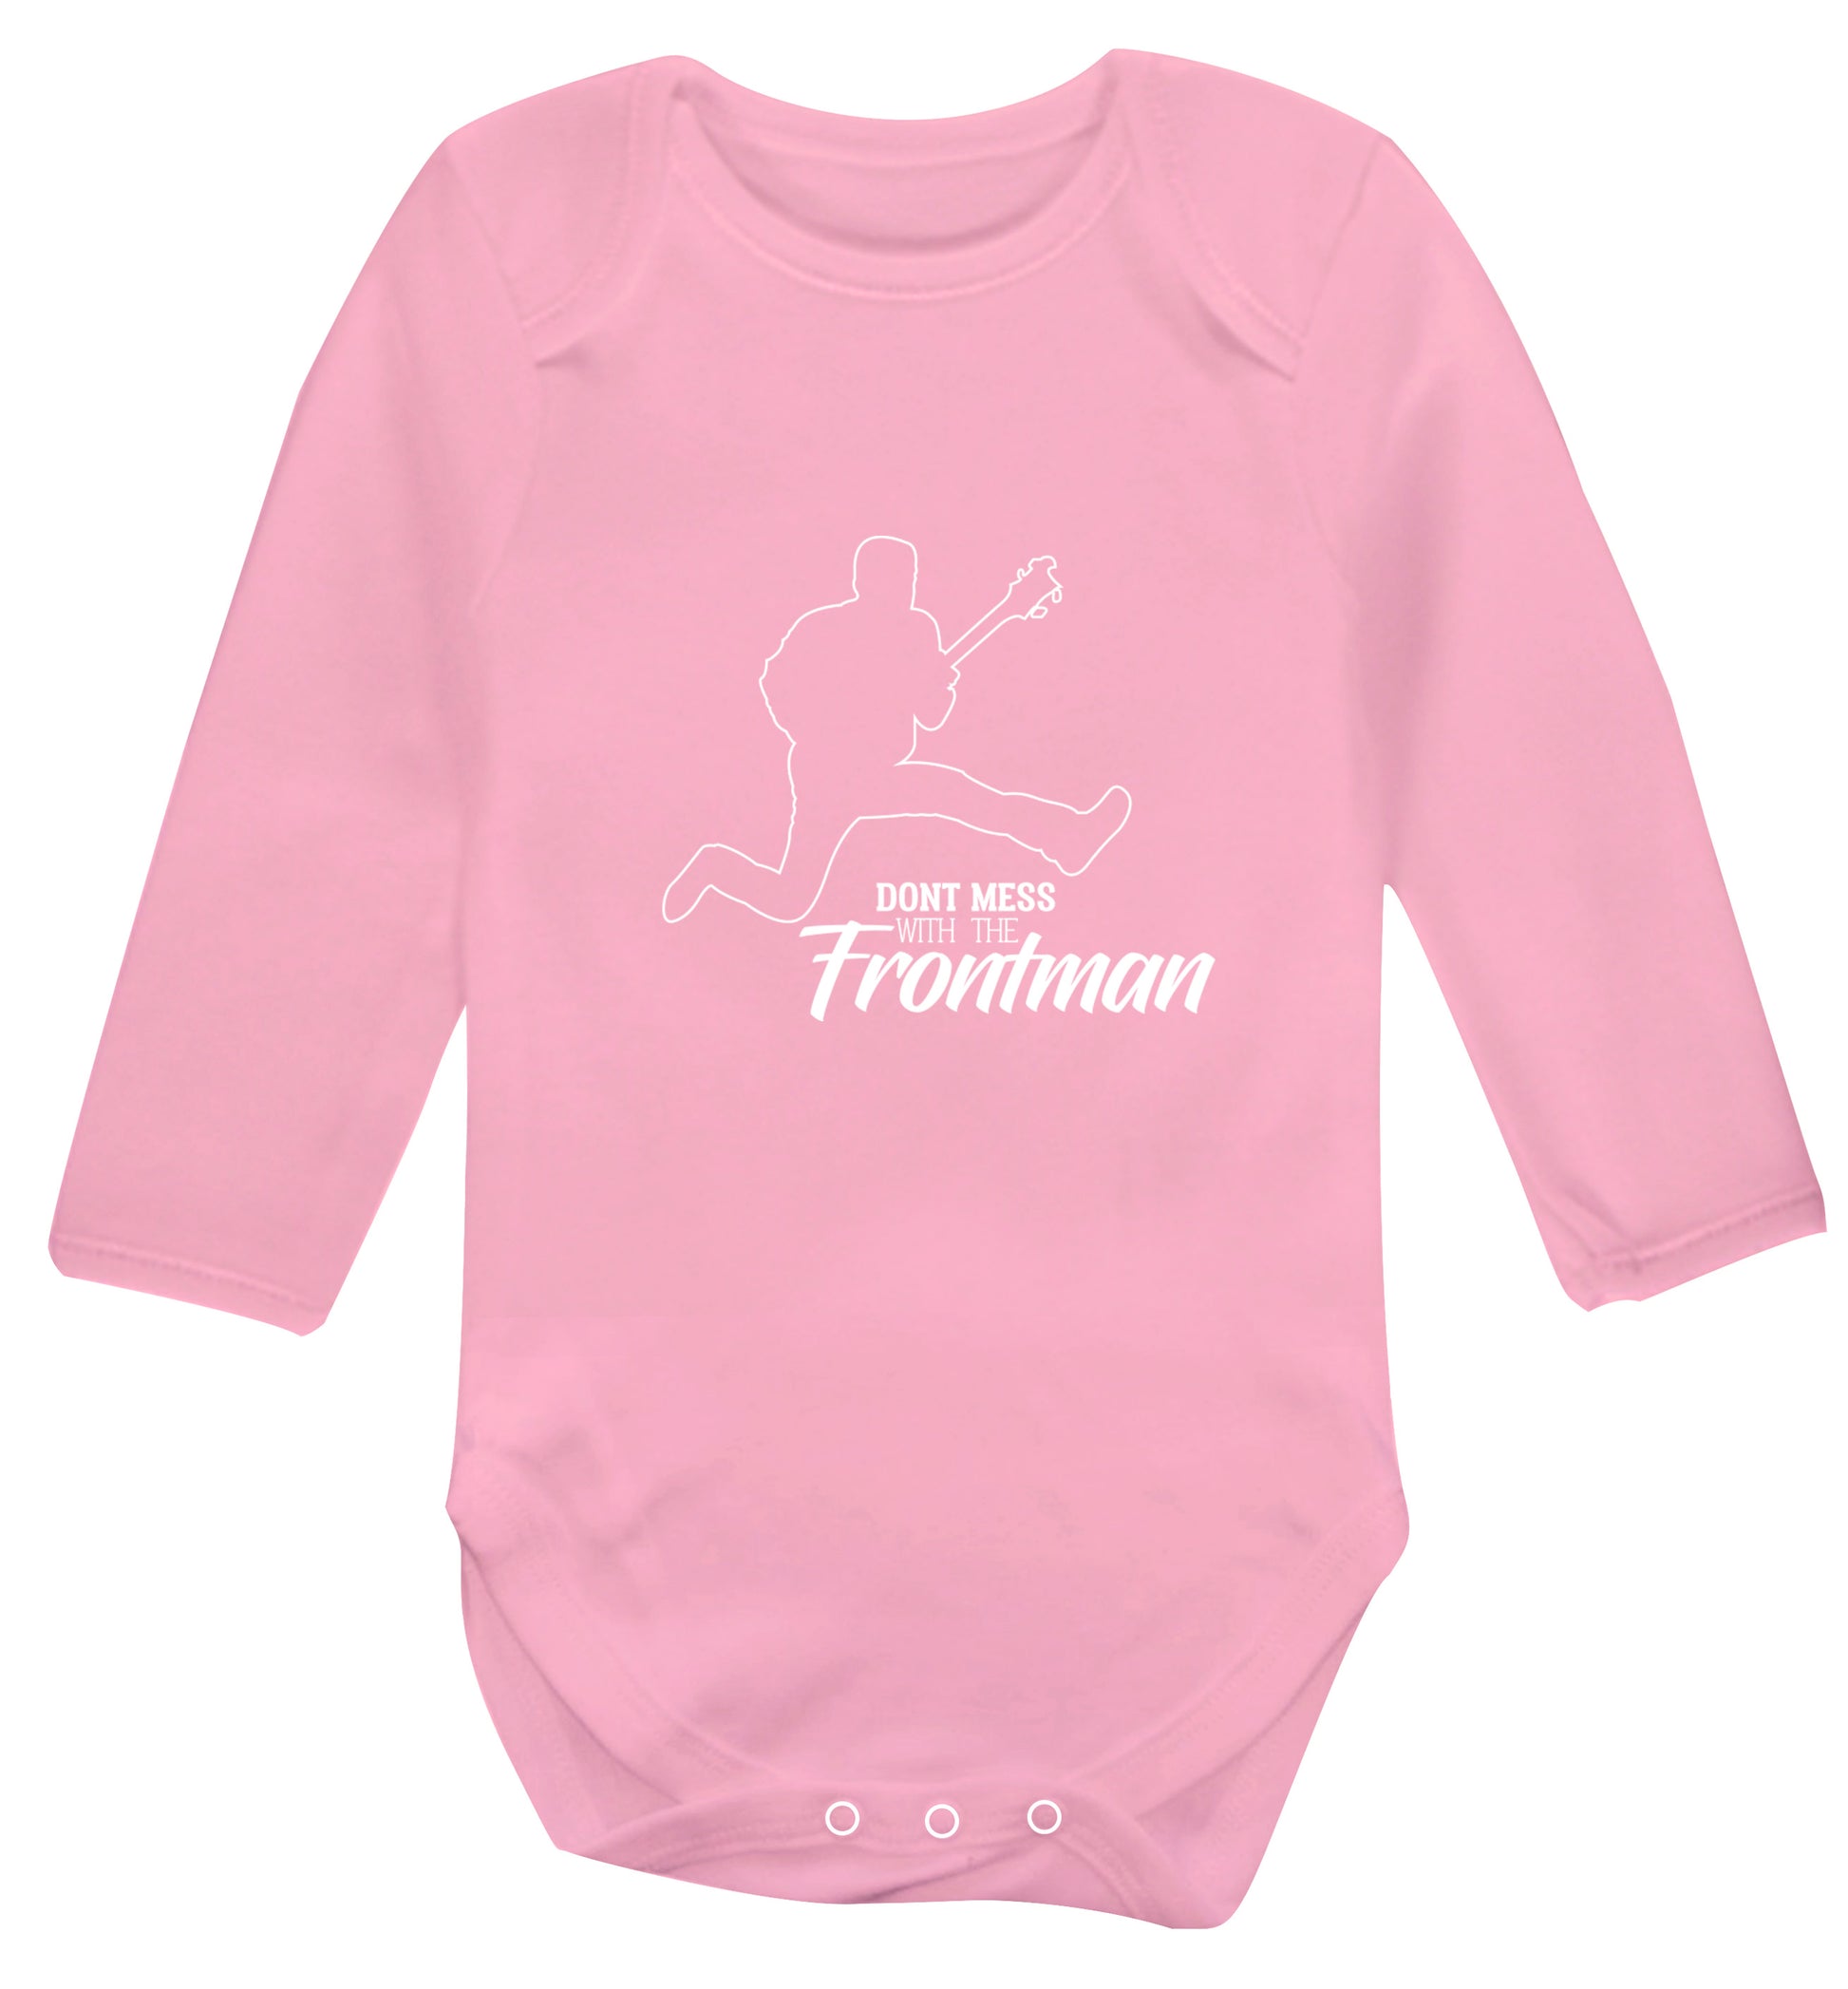 Don't mess with the frontman Baby Vest long sleeved pale pink 6-12 months